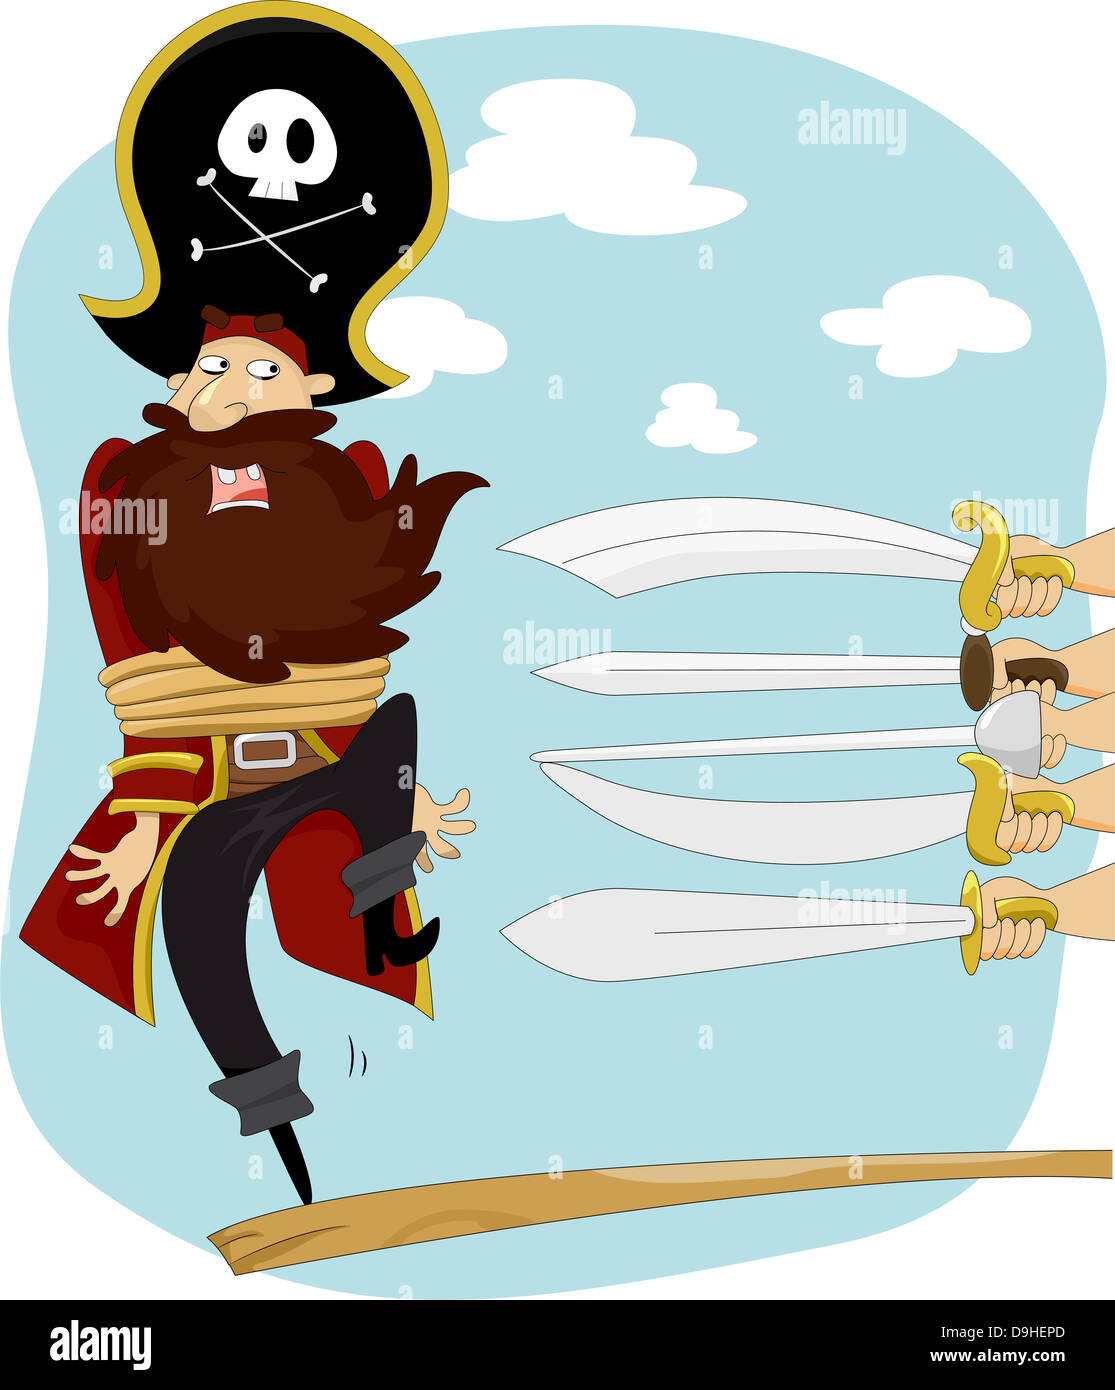 Illustration of Swords Pointing on Male Pirate Walking the Plank for Execution Stock Photo